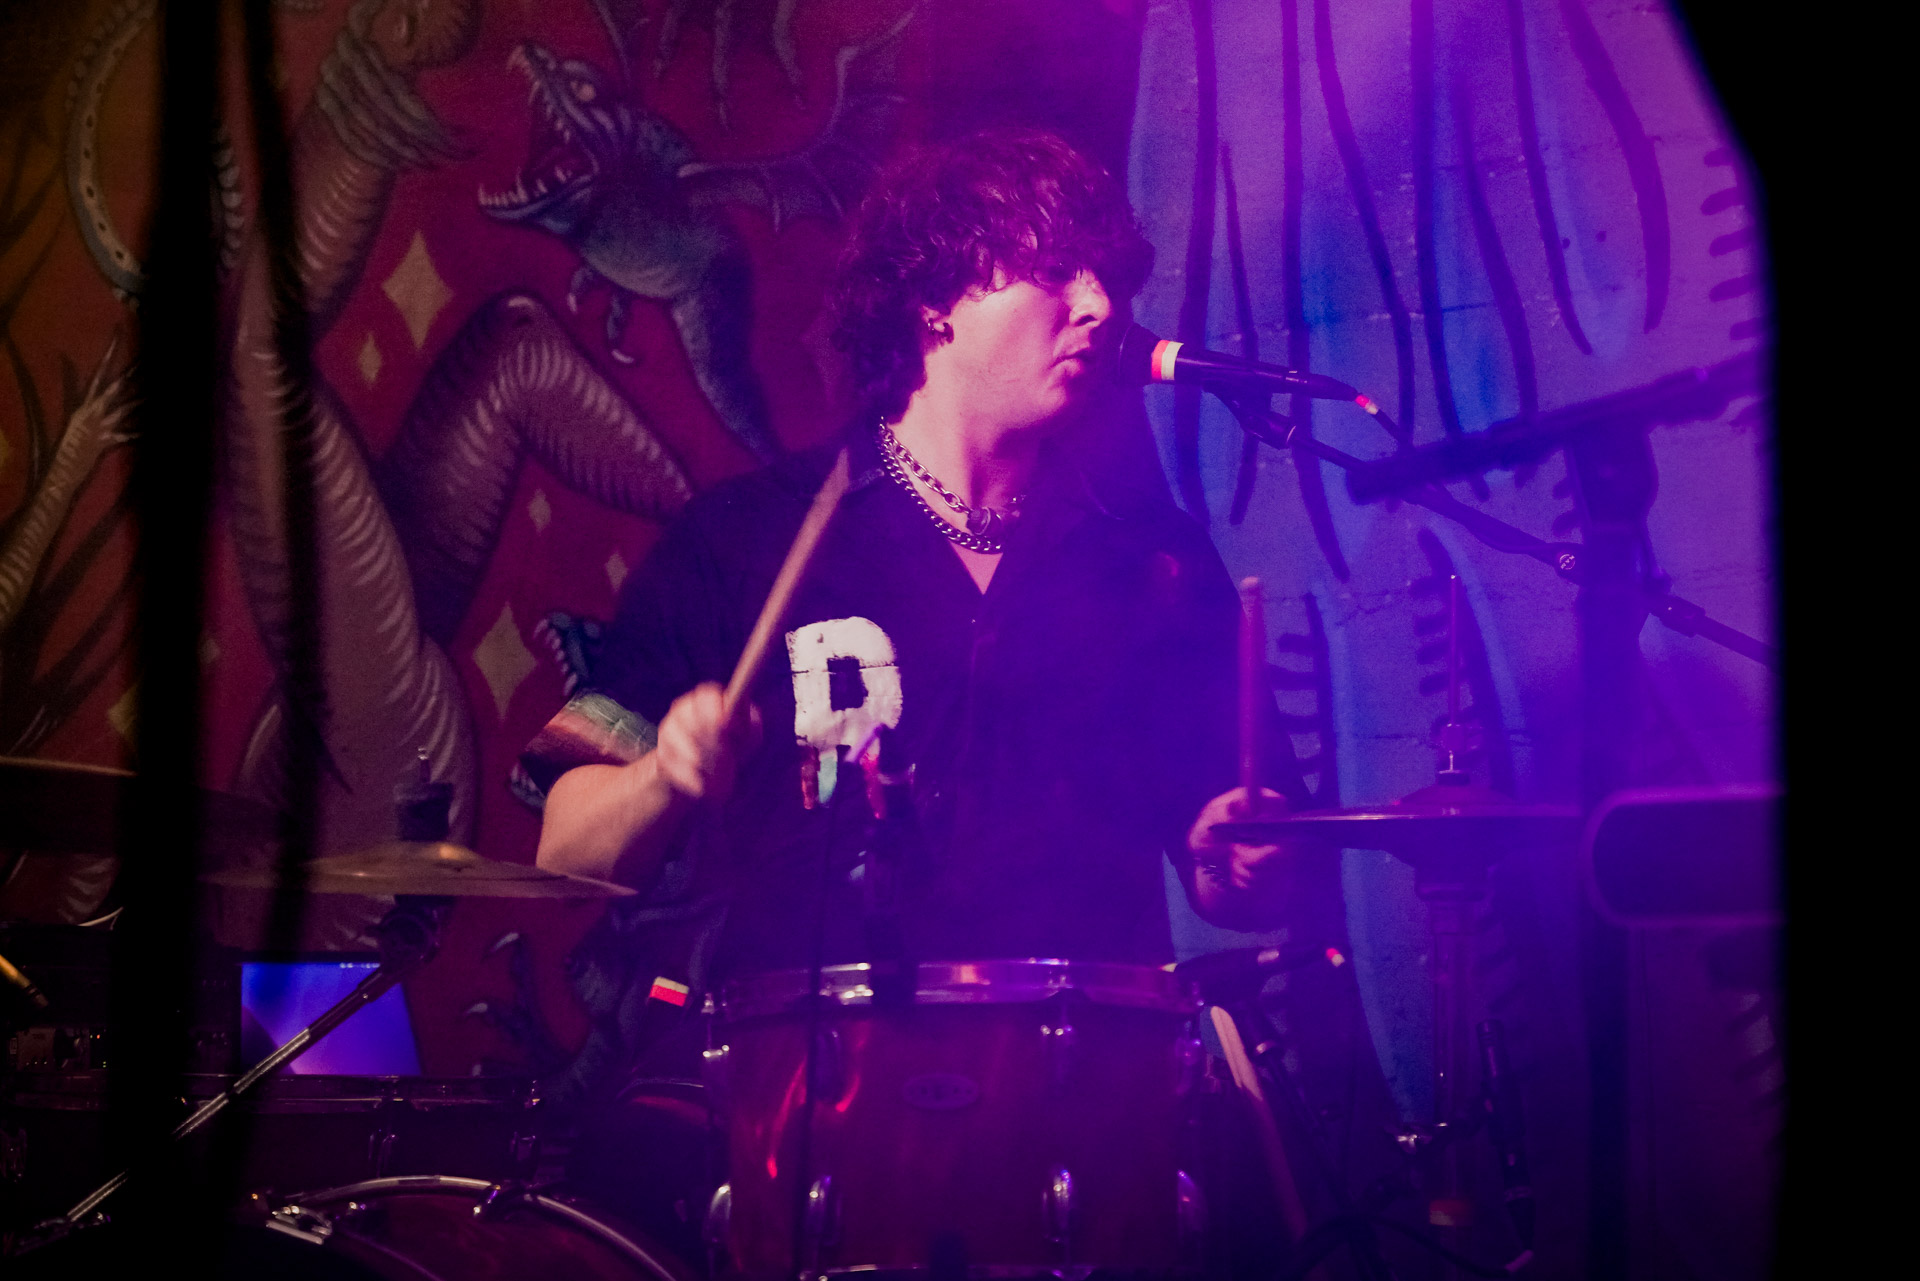 A musician on stage singing and playing drums